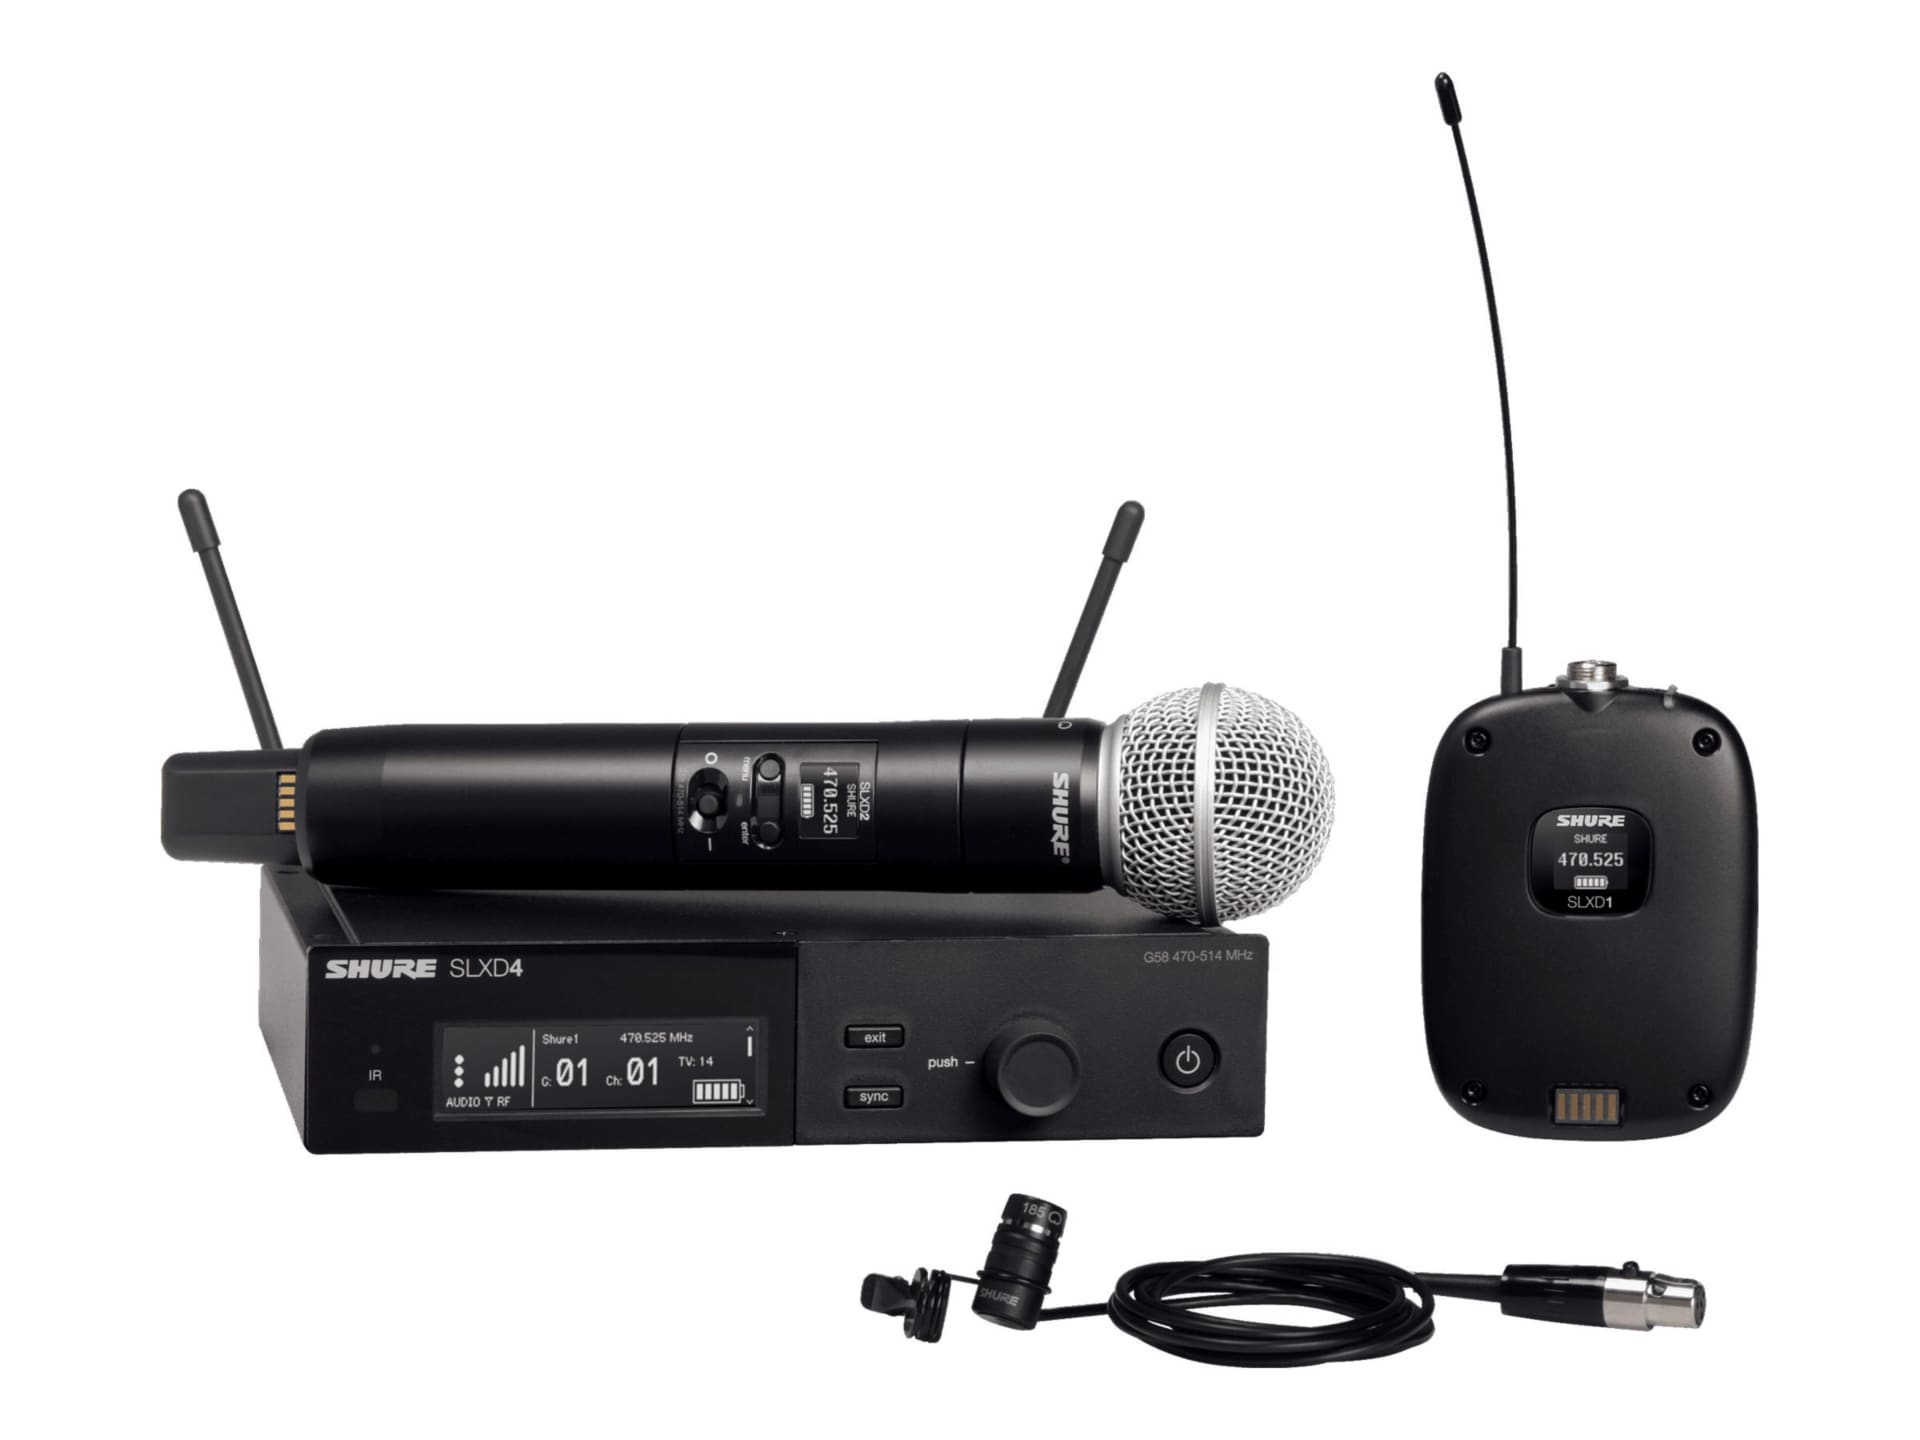 Shure SLXD124/85 - H55 Band - wireless microphone system